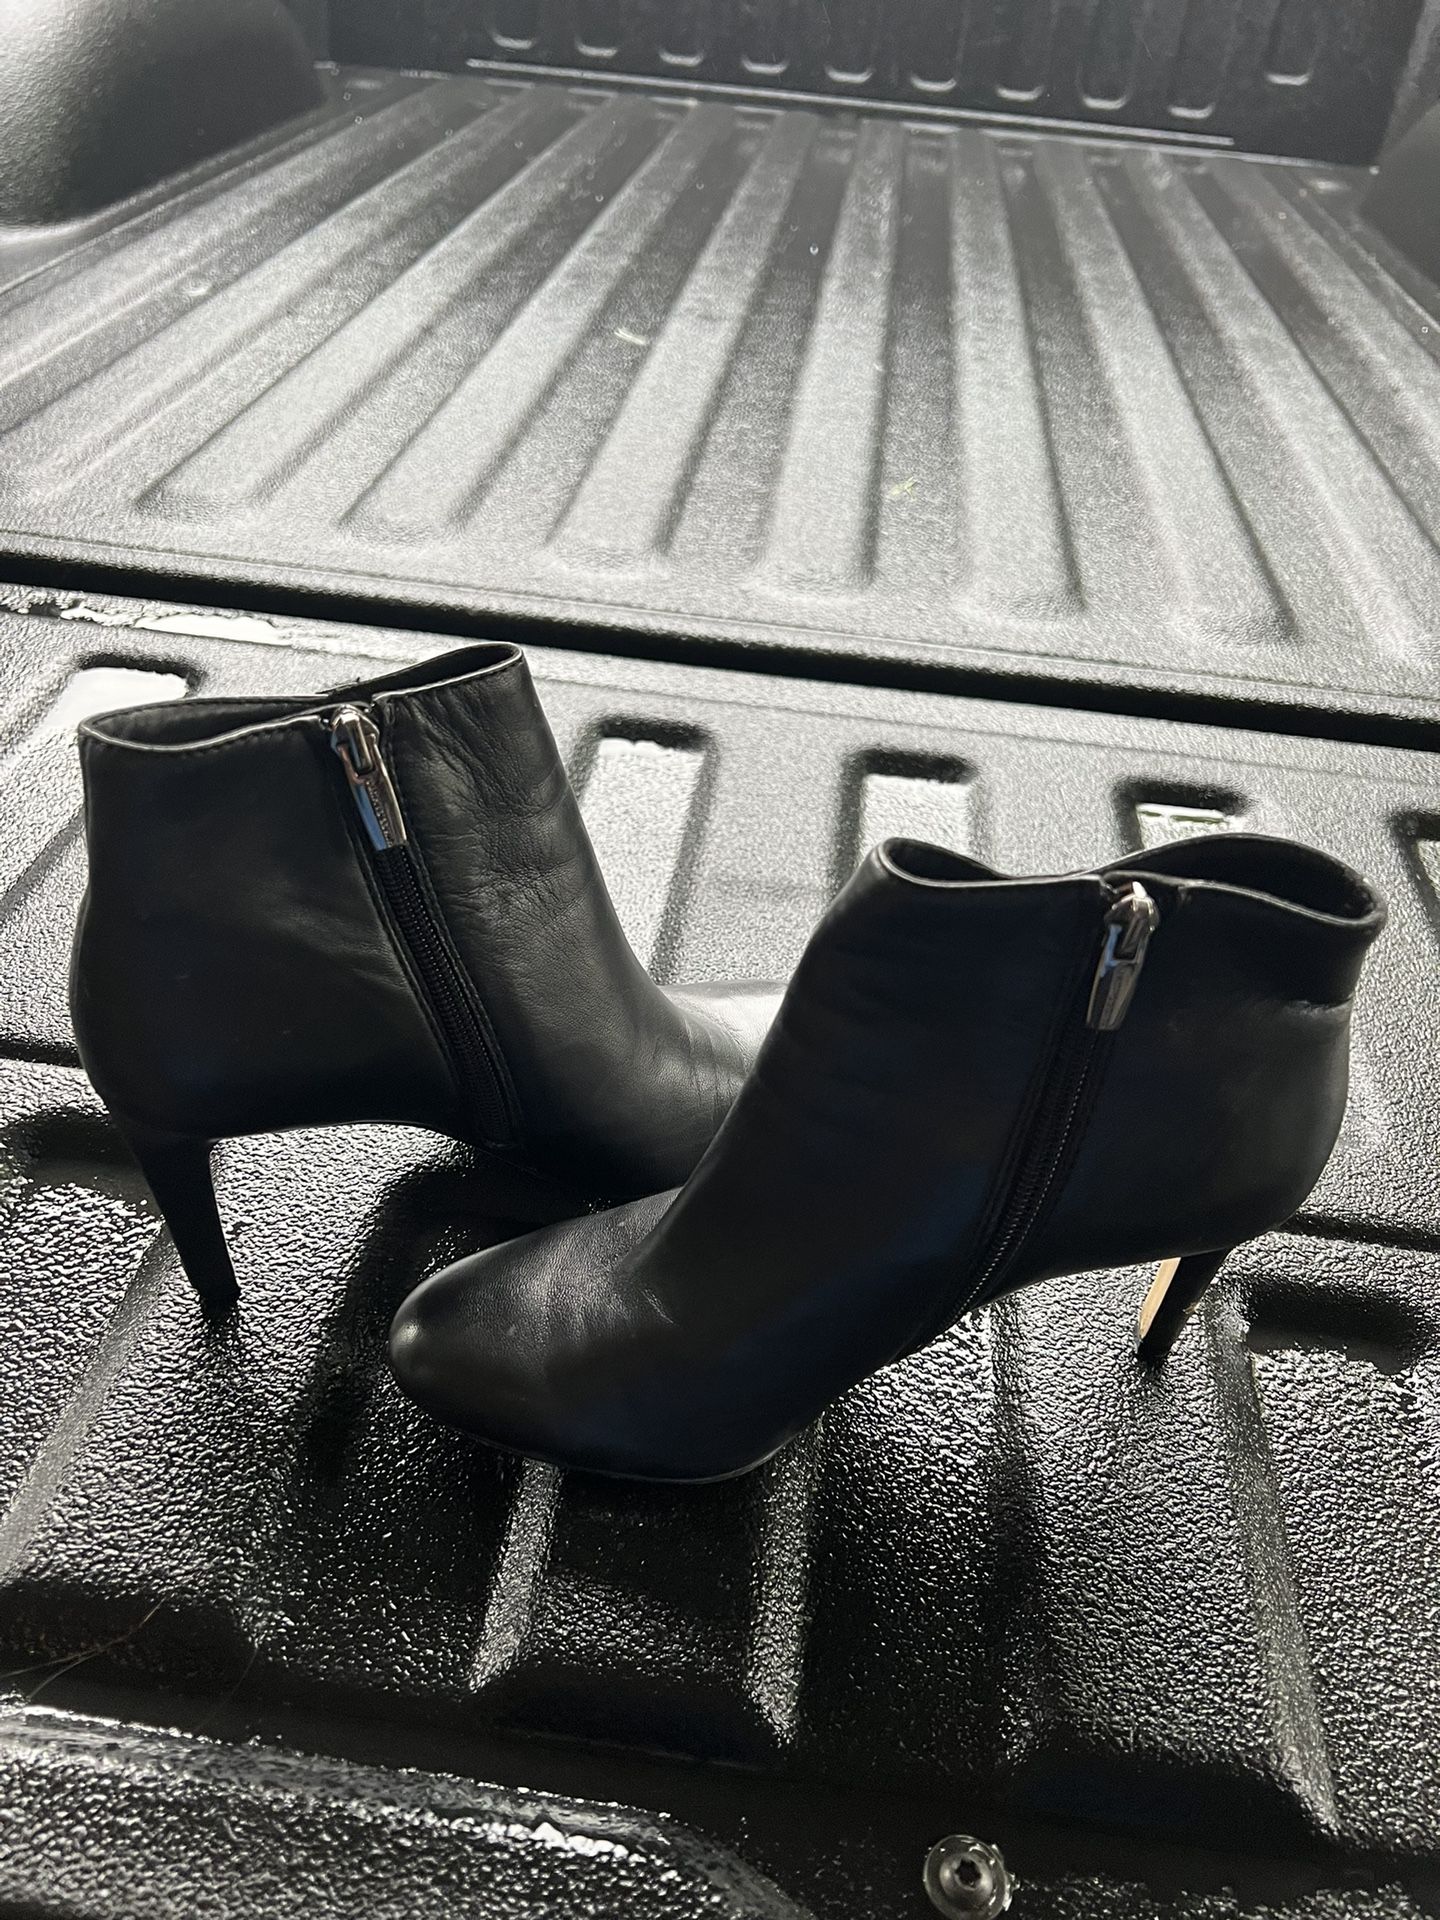 Vince Camuto Black Leather Charlotte Boots/High Heels Size 6M